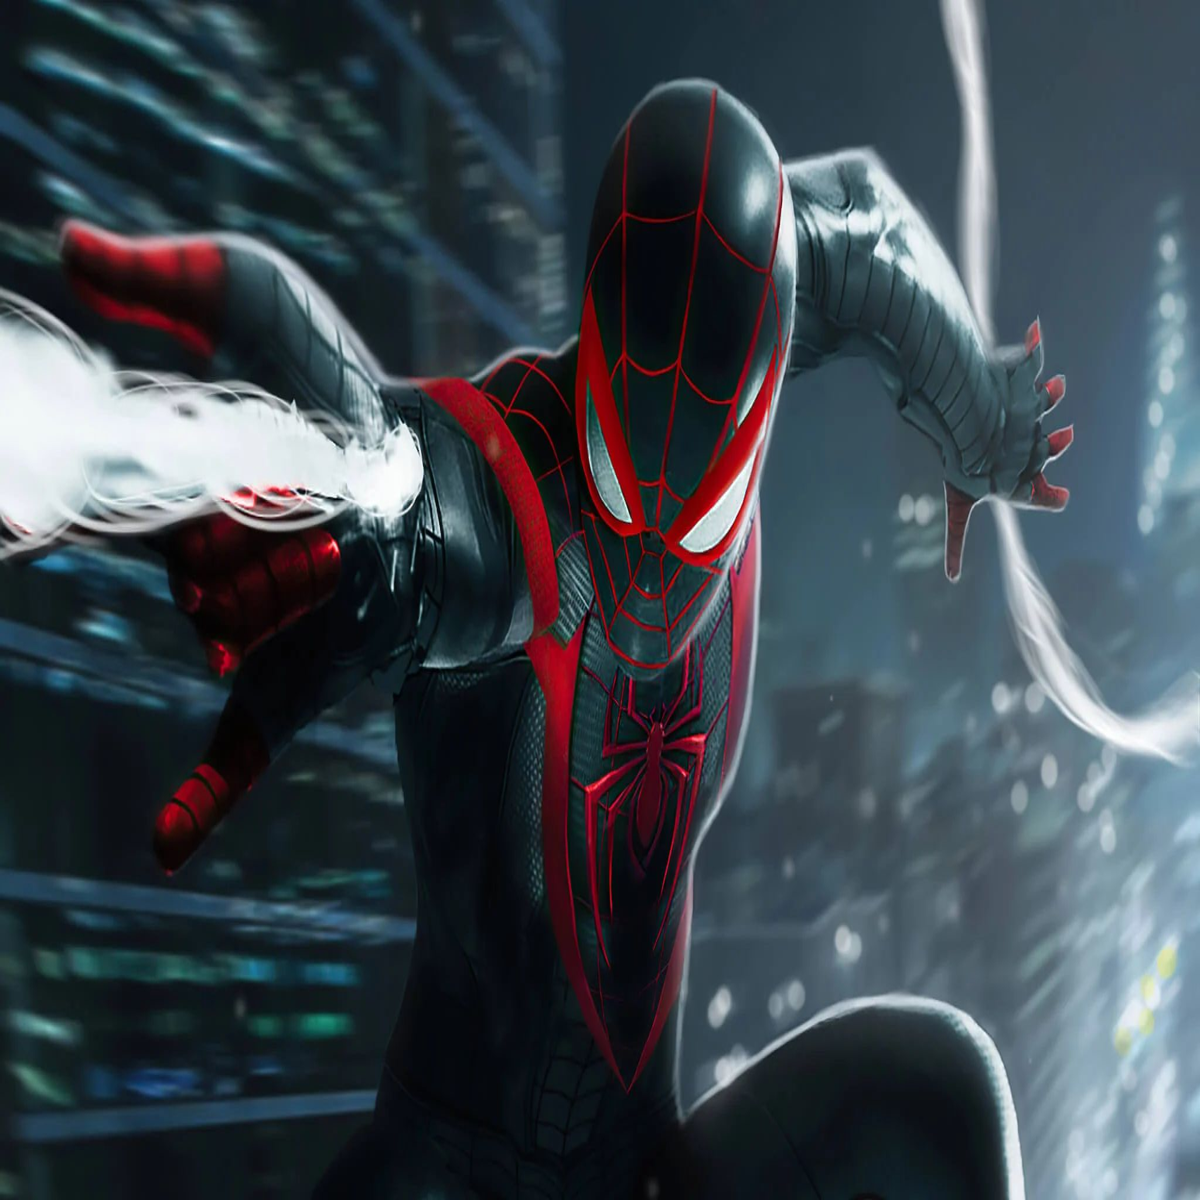 Spider-Man Remastered and Miles Morales Are Coming to PC